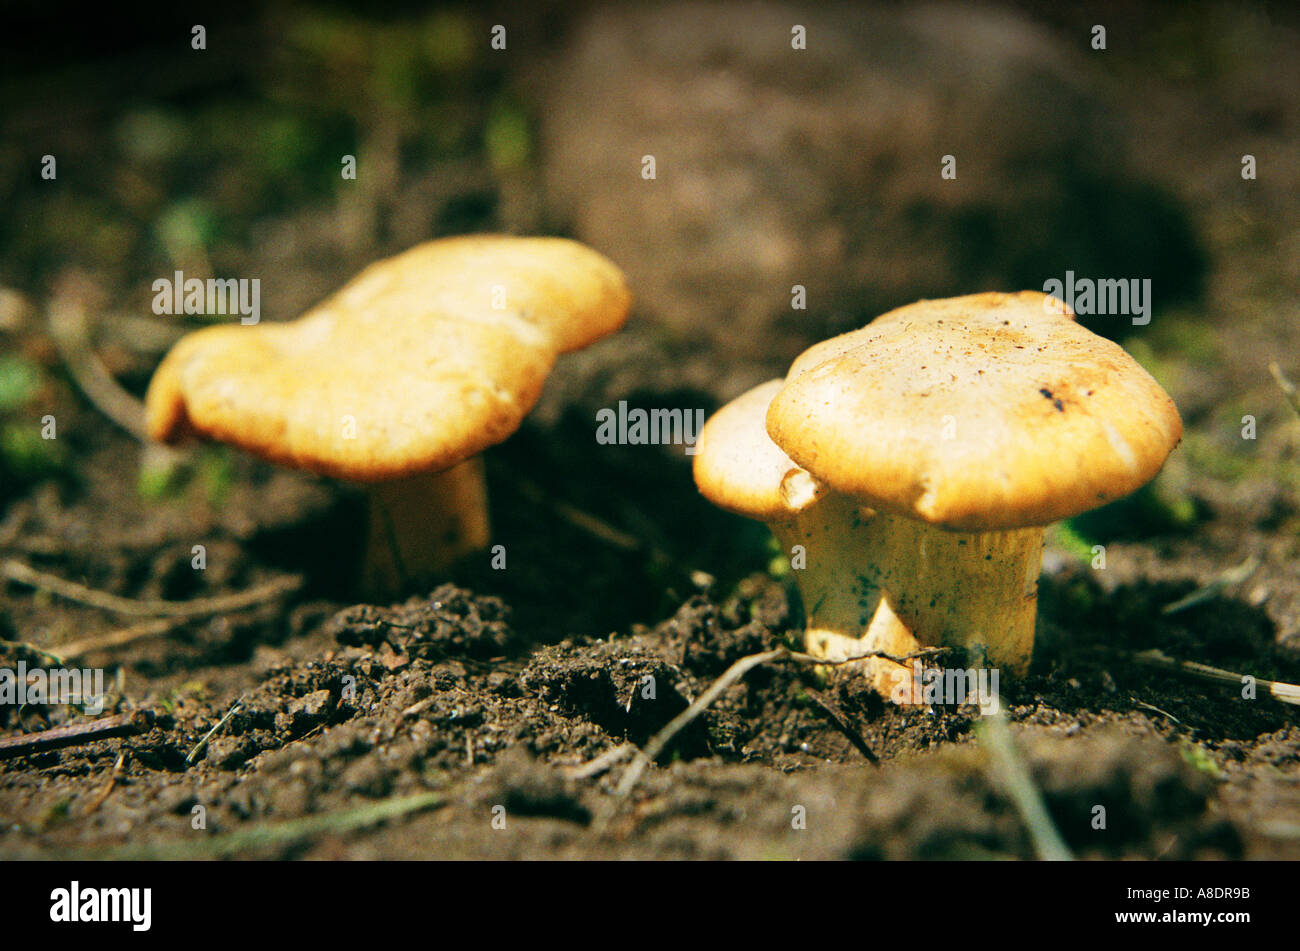 Yellow Chantarelle CANTHARELLUS CIBARIUS delicious edible mushroom photographed in V sterg tland Sweden Stock Photo